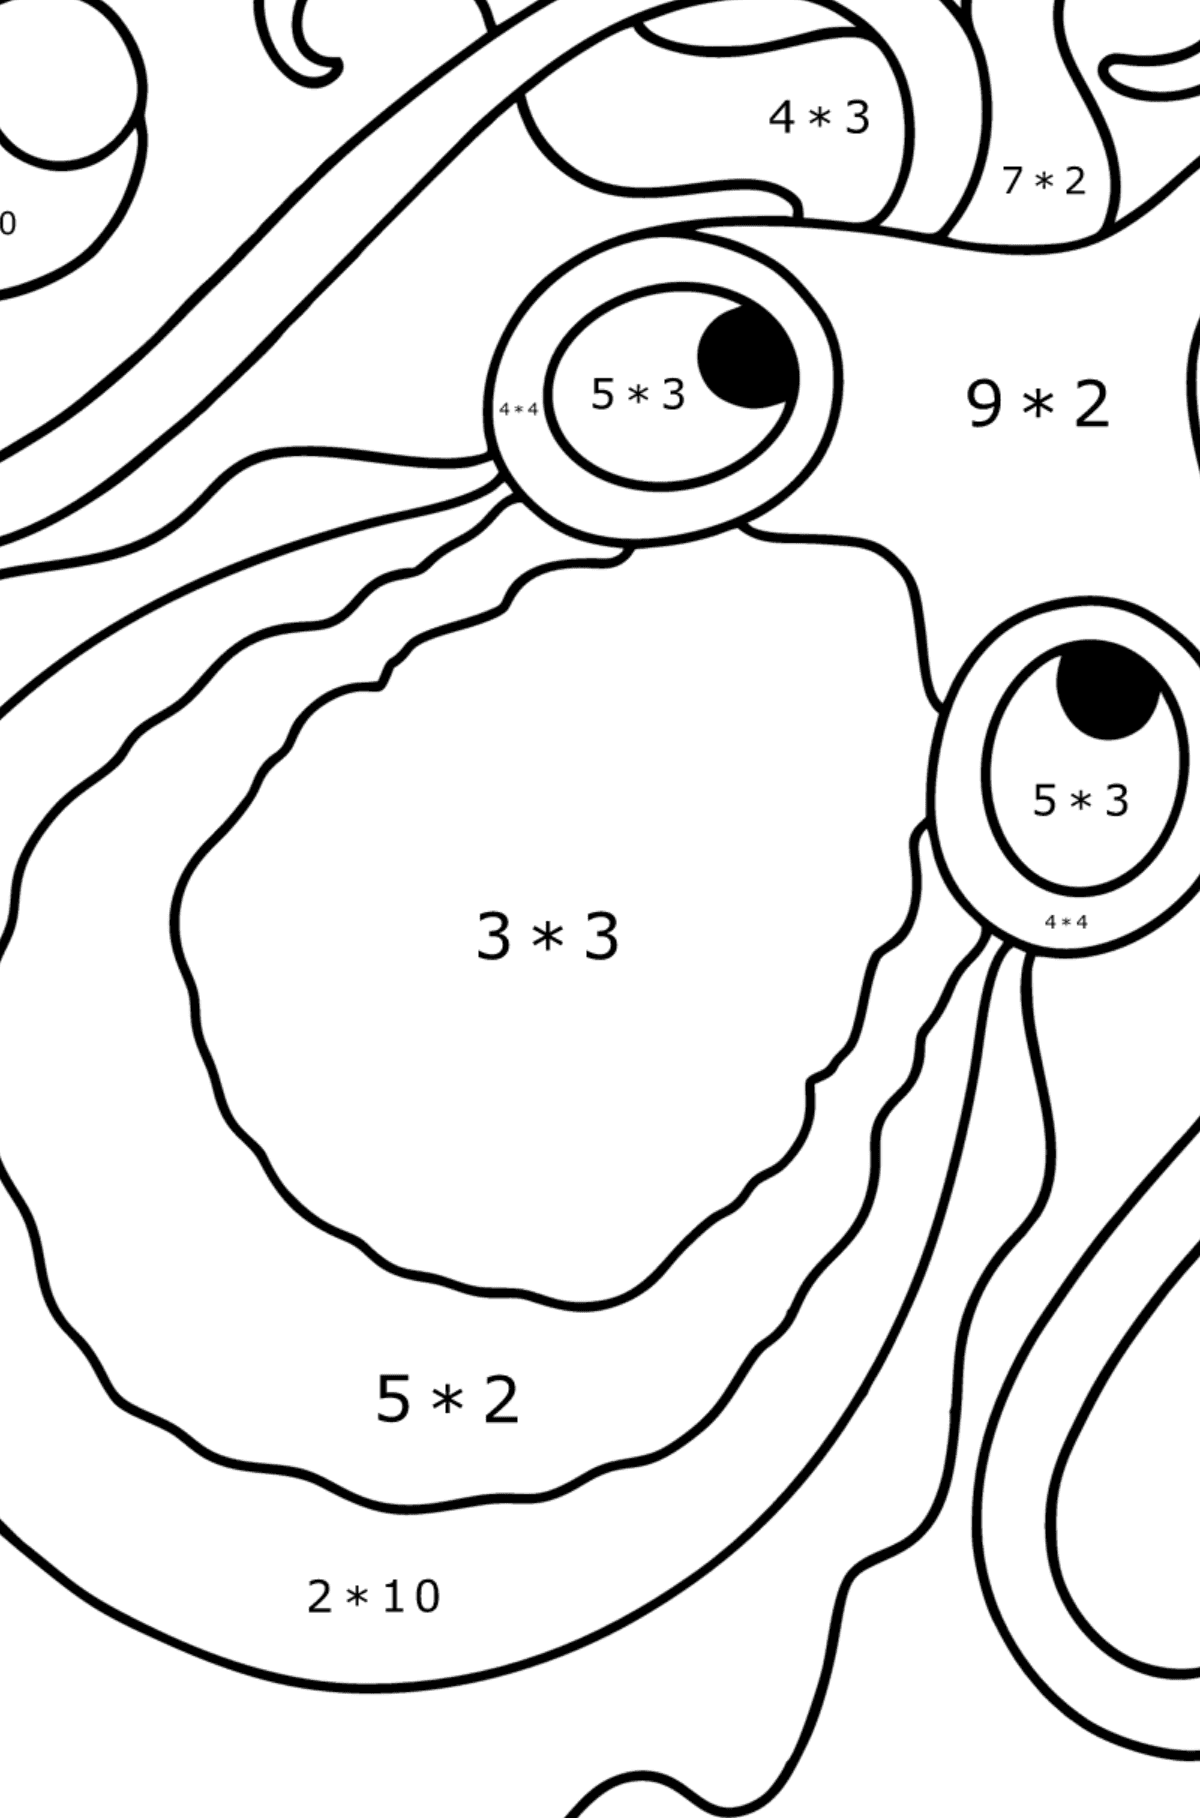 Cuttlefish coloring page - Math Coloring - Multiplication for Kids